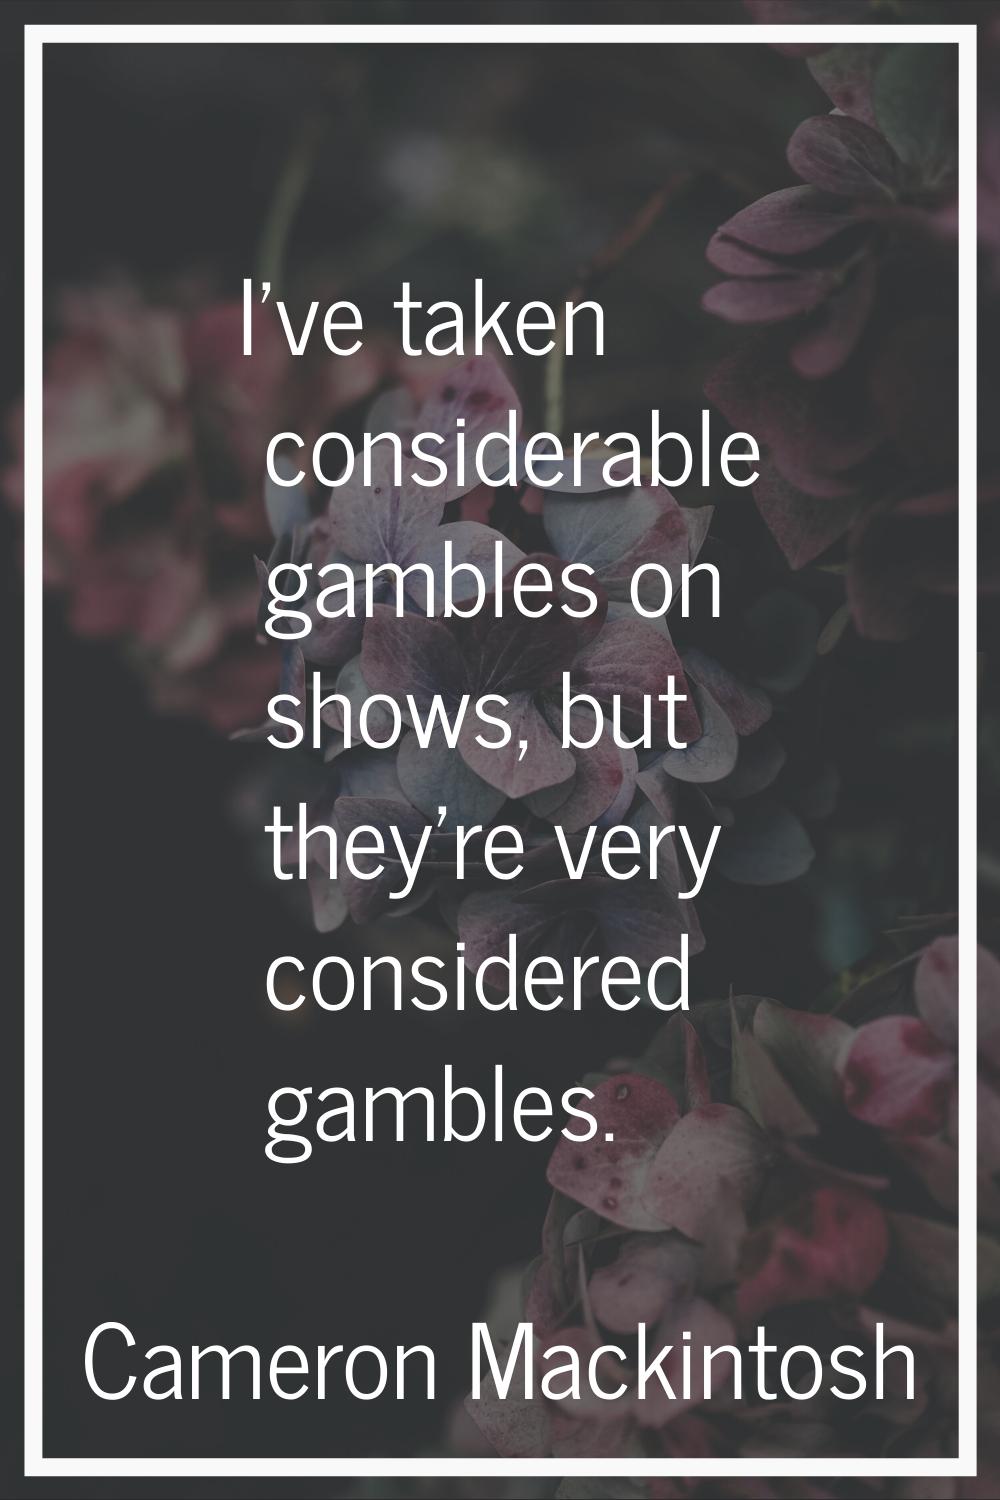 I've taken considerable gambles on shows, but they're very considered gambles.